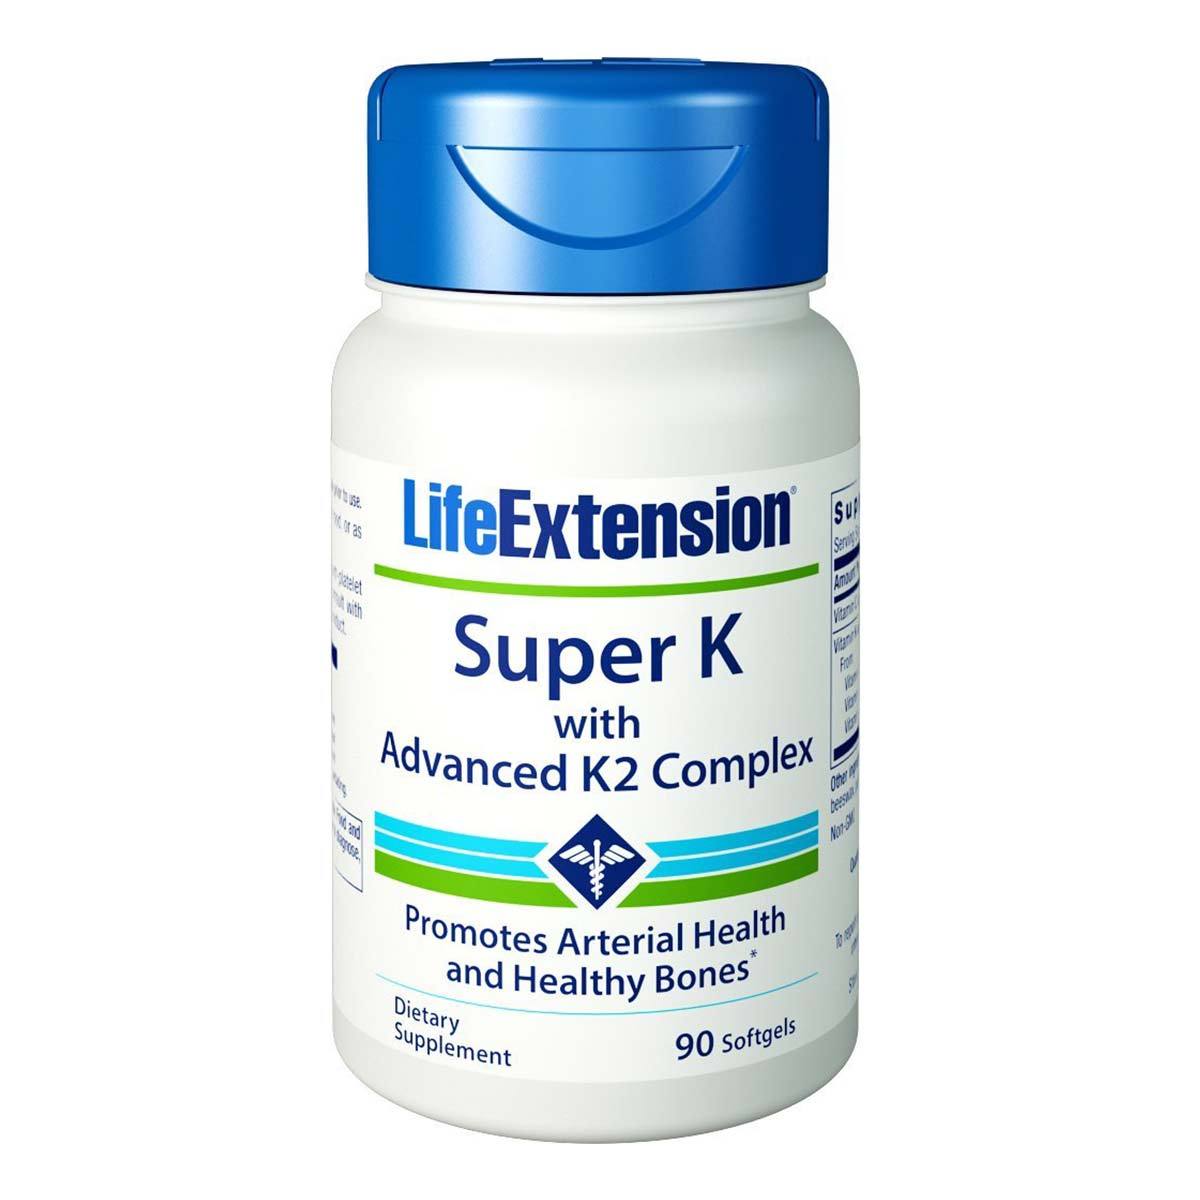 Primary image of Super K with Advanced K2 Complex